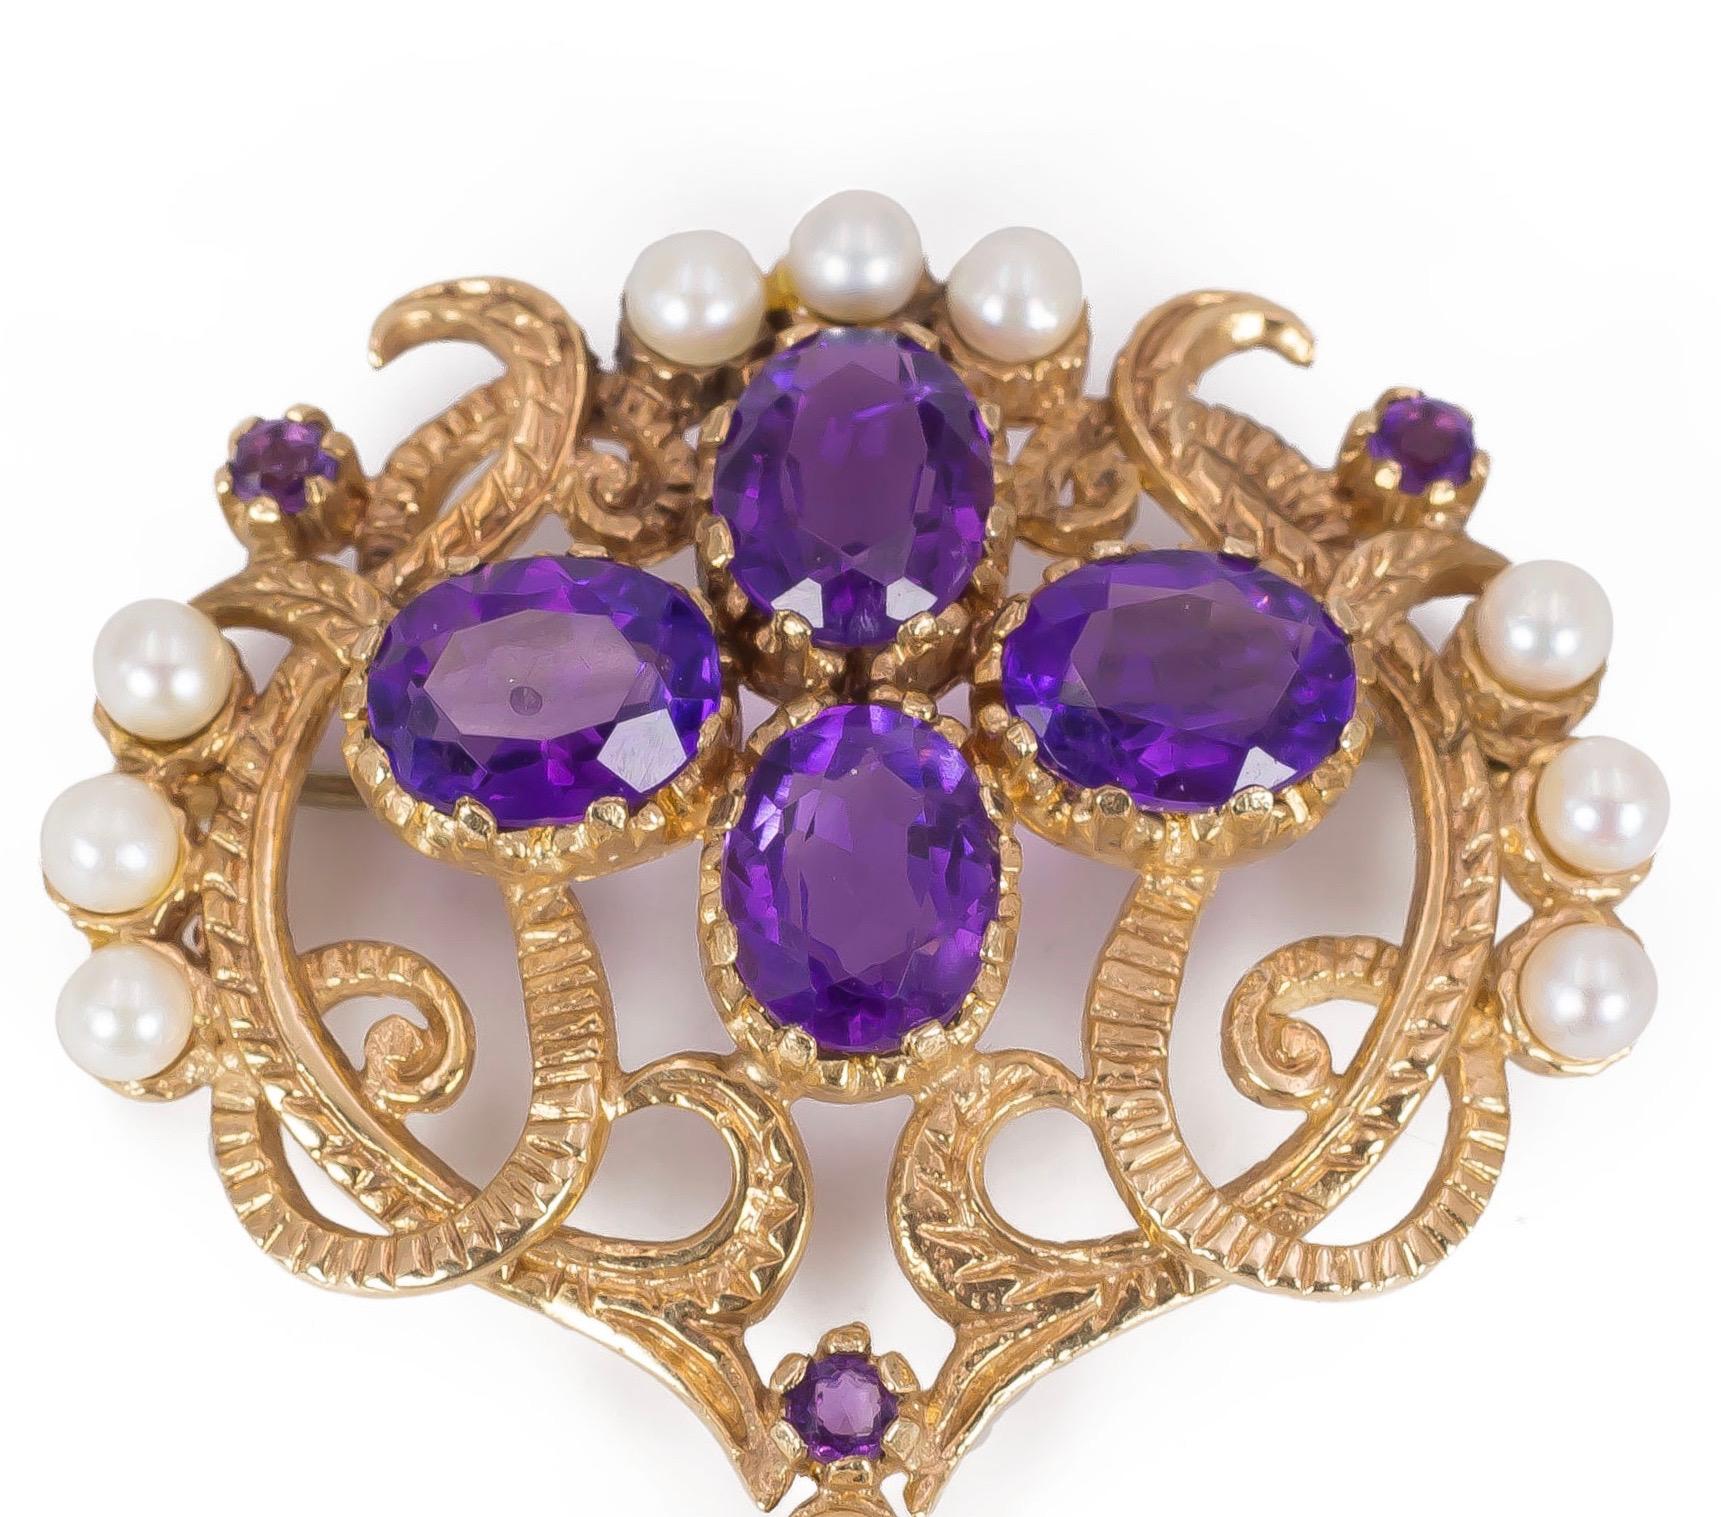 This antique brooch, dating from the early Twentieth century, features some beautiful colours: it is set with four central amethysts, two lateral ones and another one decorates an ending pendant; three outer sections are embellished with three